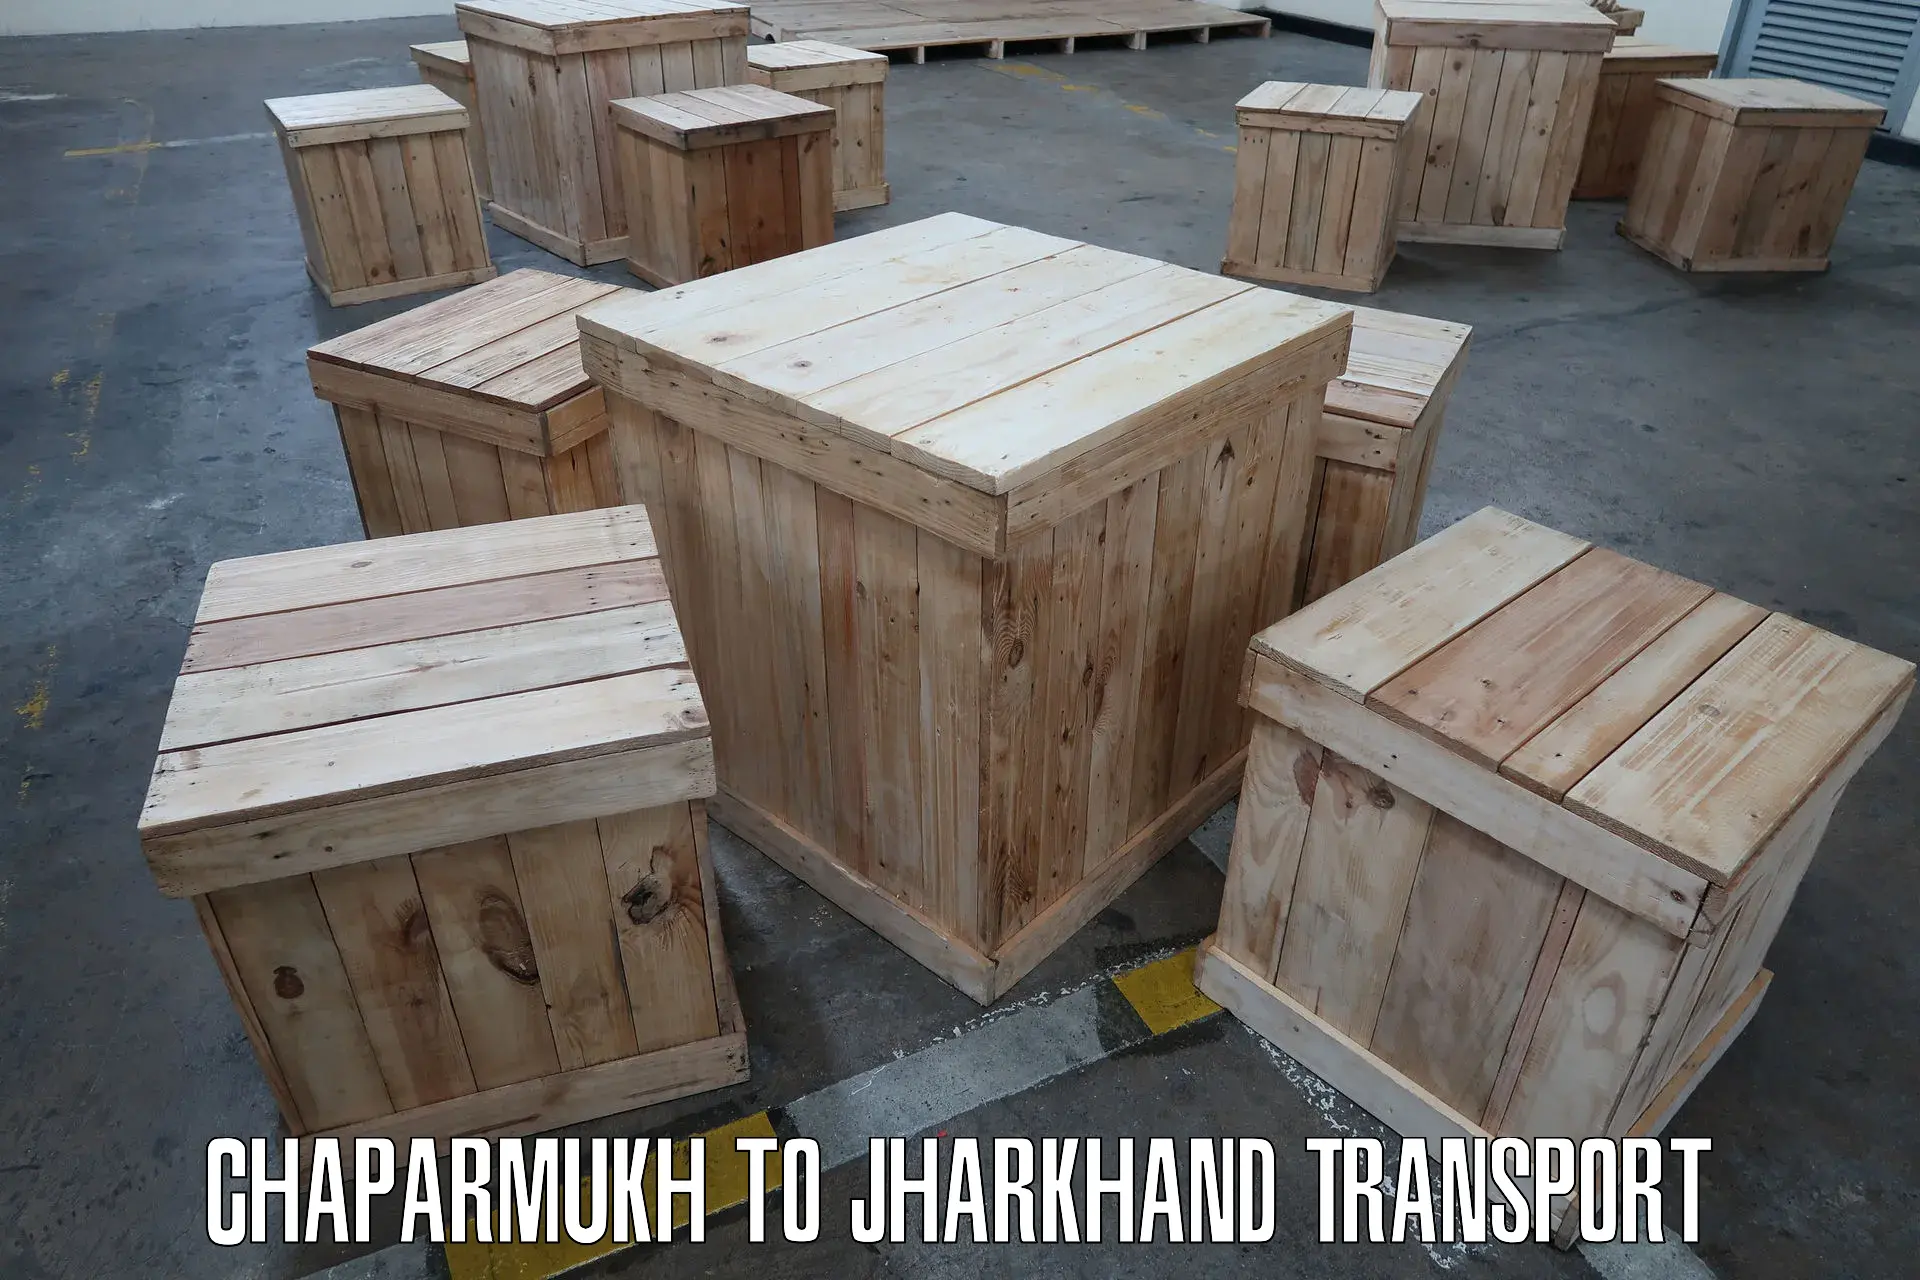 Lorry transport service in Chaparmukh to Jharkhand